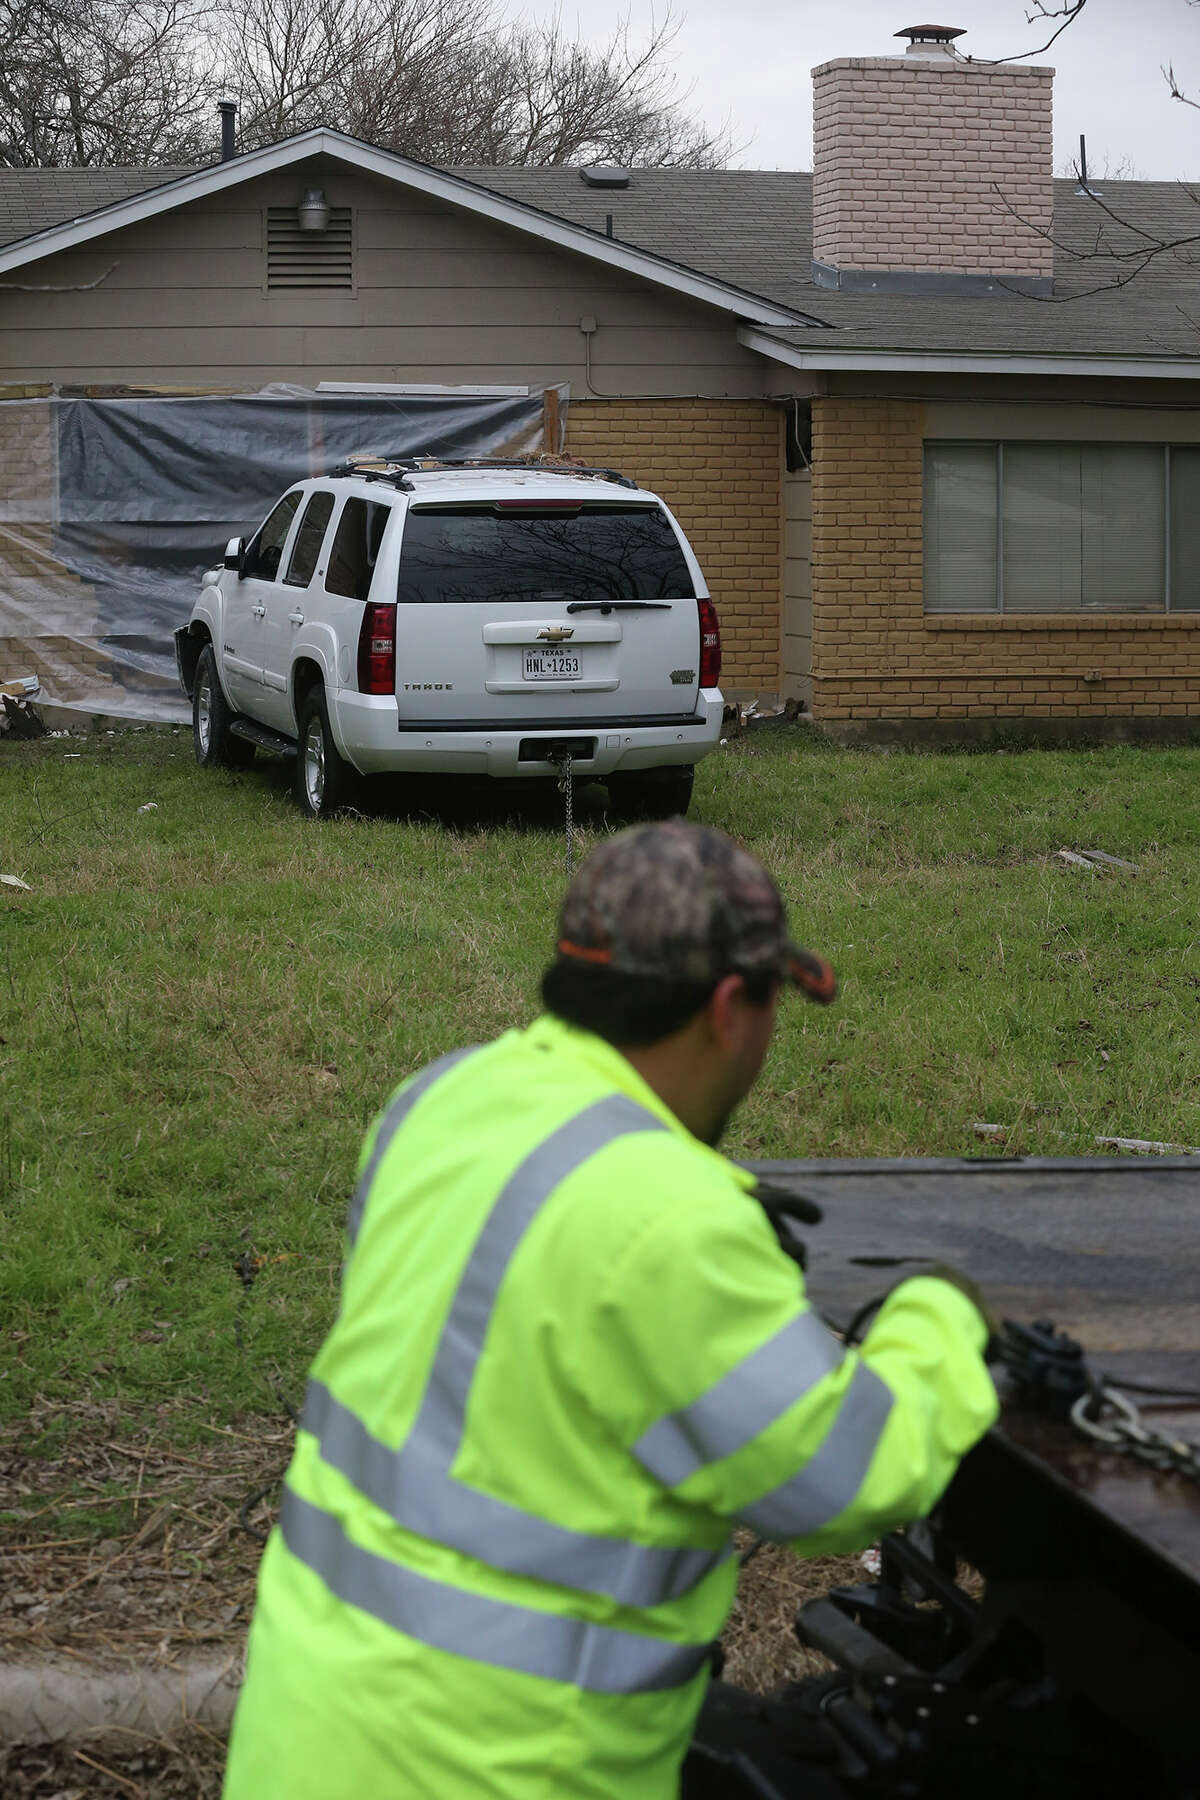 A tow truck driver prepares to remove a Chevy Tahoe Friday February 3, 2017 from the back yard of a home after crashing into a home on the 11,000 block of Janet Lee Drive. An officer at the scene said the driver was intoxicated and was not injured. The vehicle came to a halt after crashing through several fences and hitting the house.